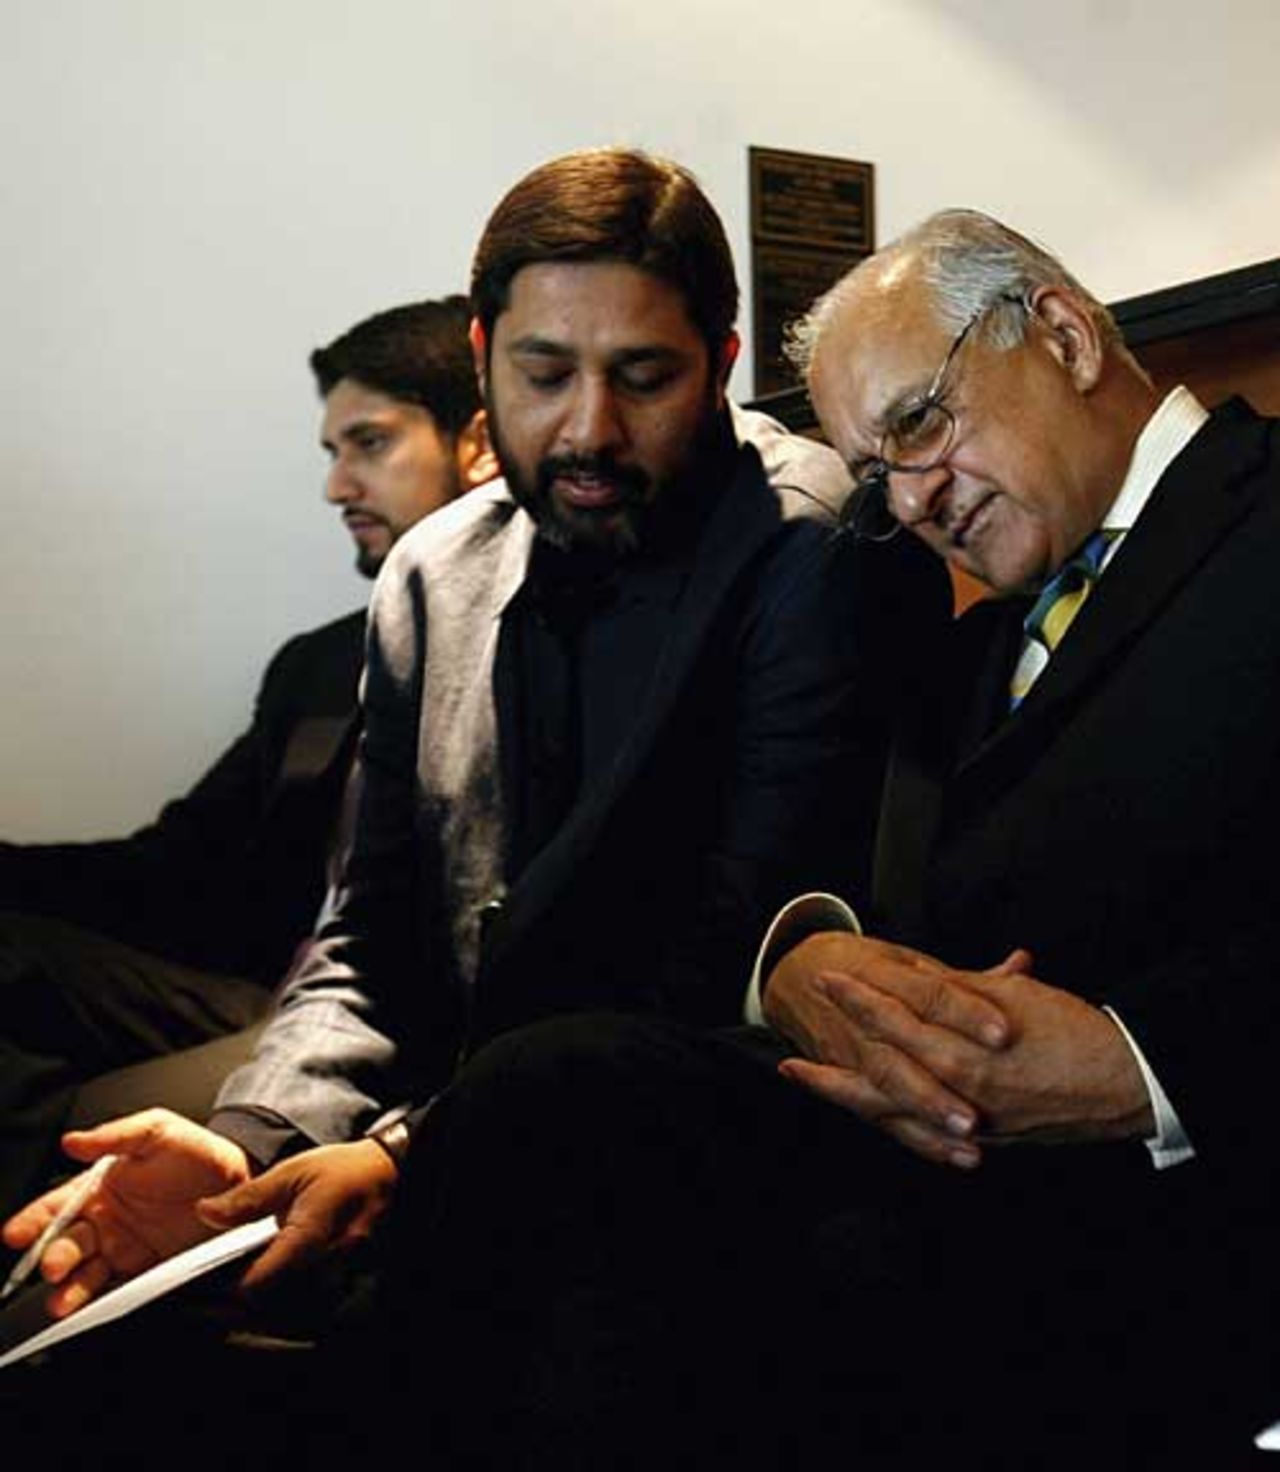 Inzamam-ul-Haq and Shaharyar Khan in discussion ahead of the closing statements, The Oval, September 28, 2006